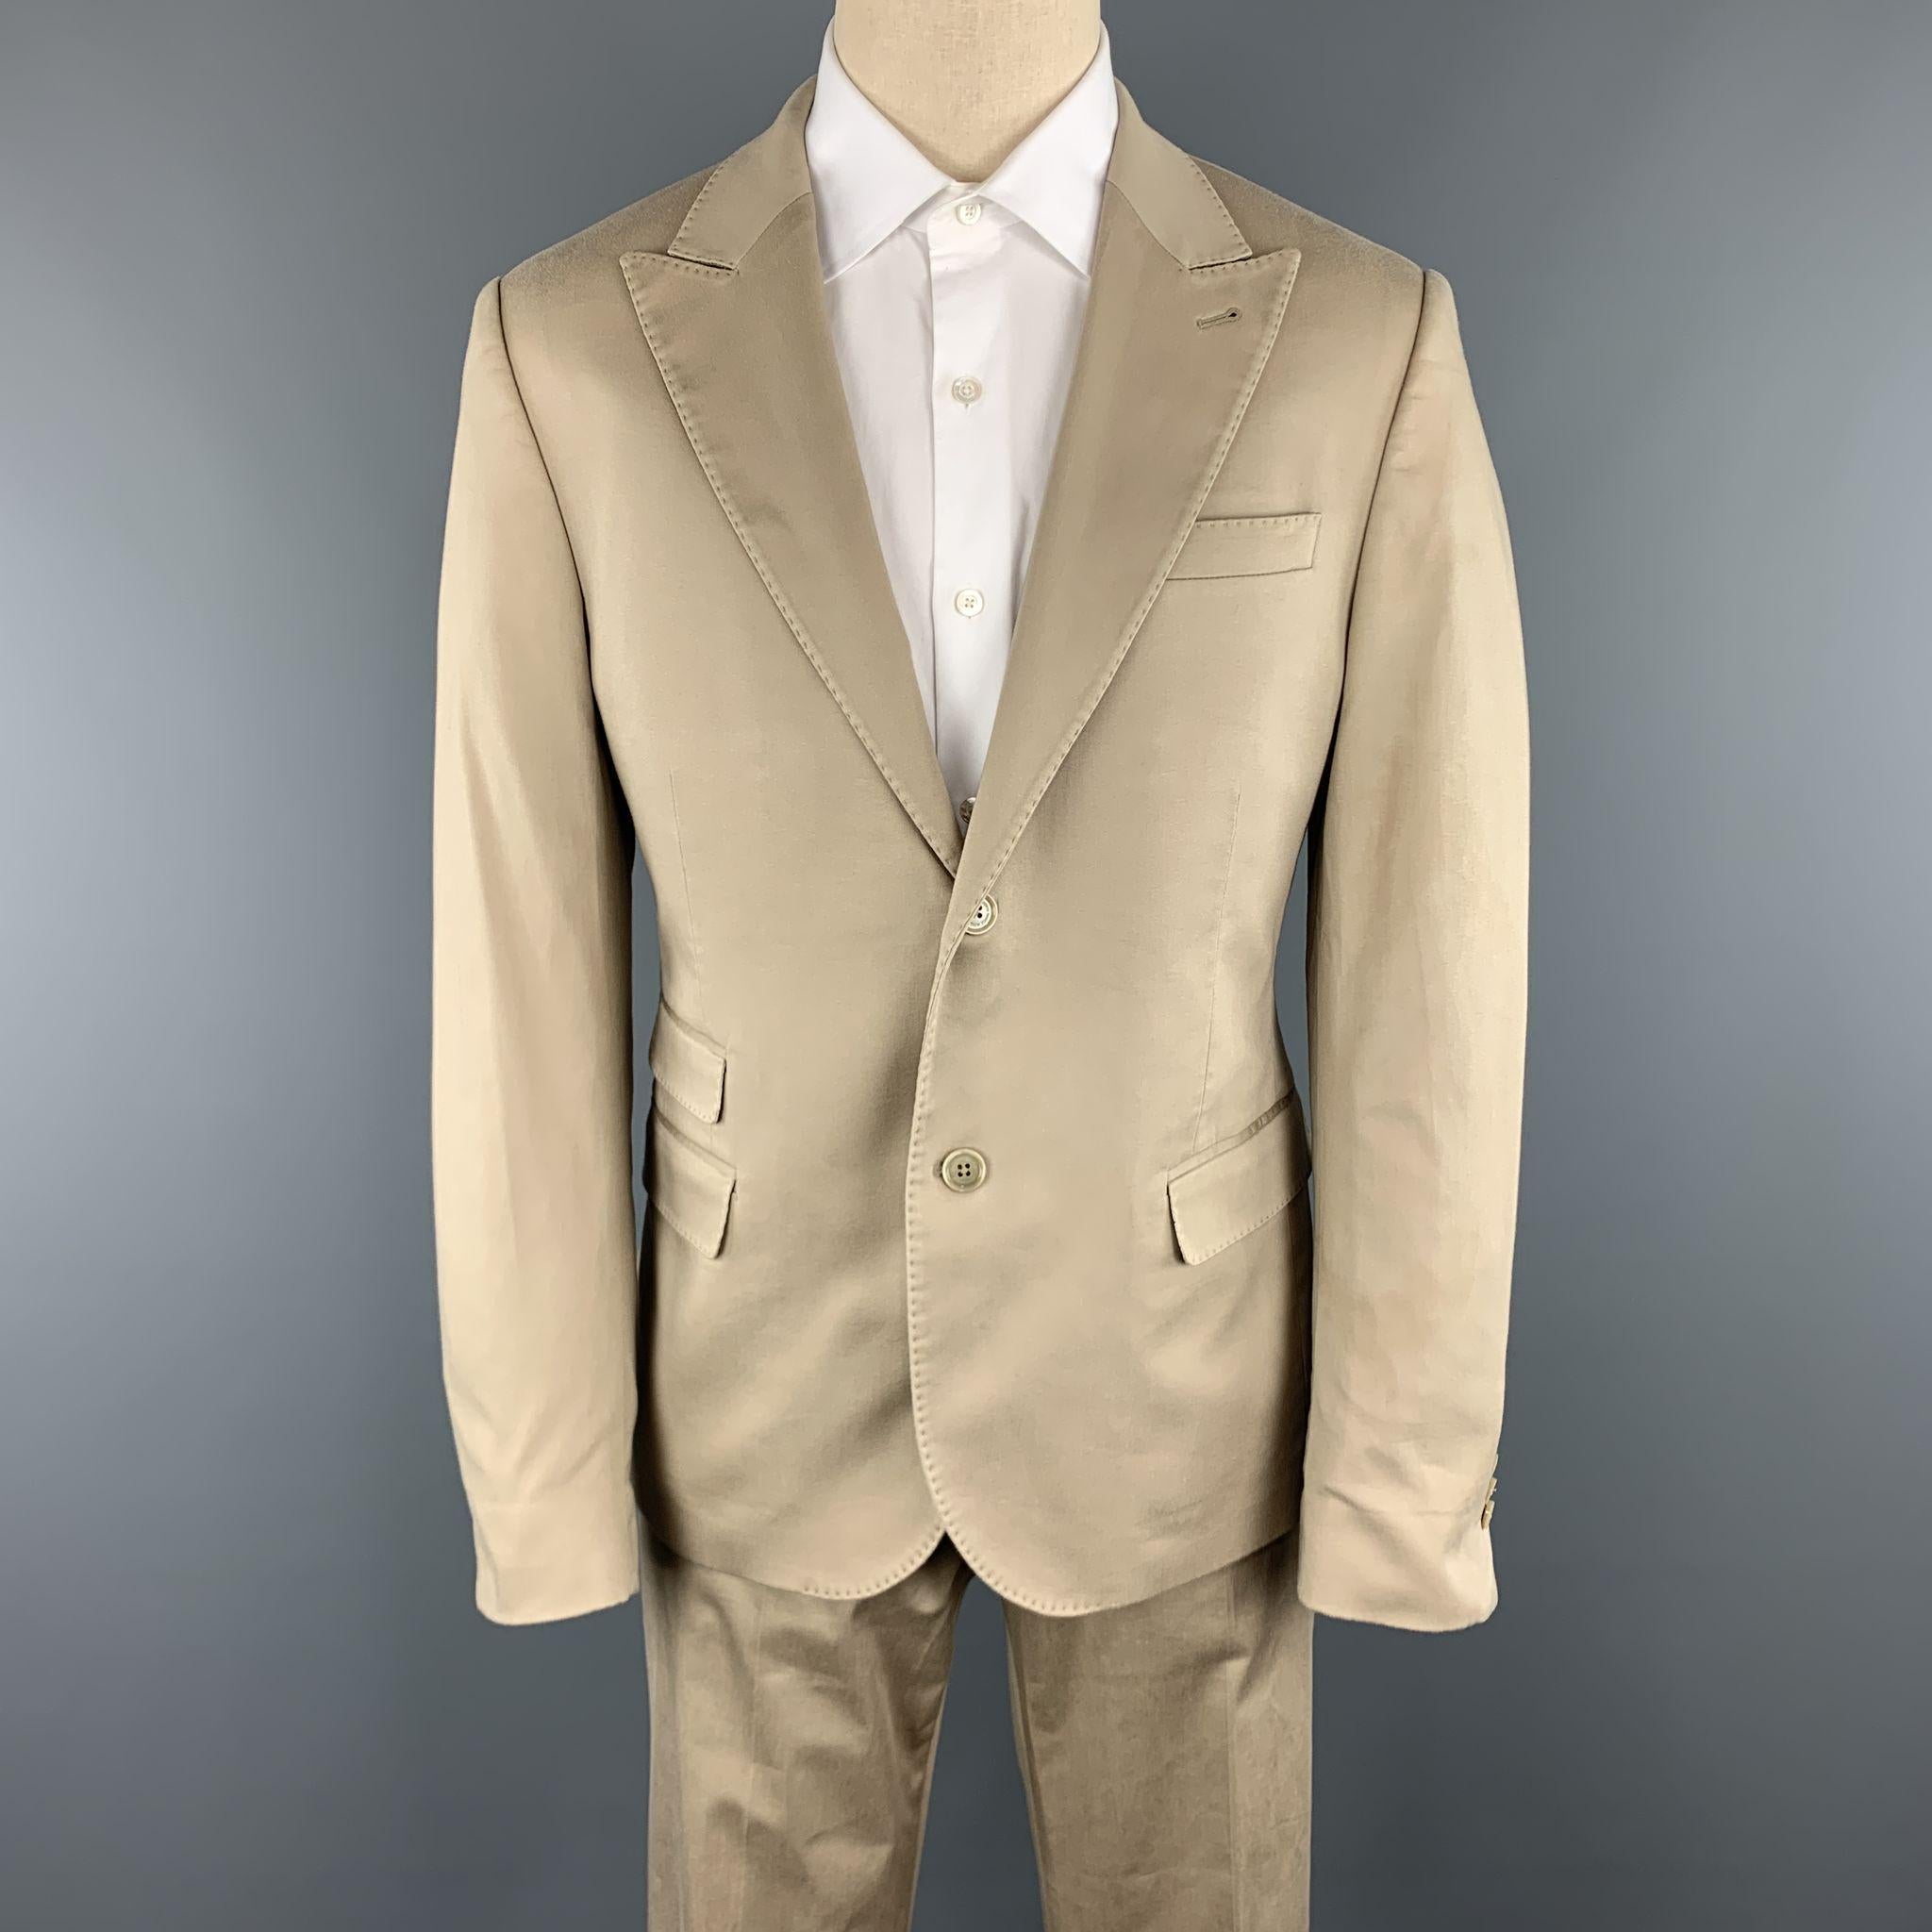  DANIELE ALESSANDRINI Suit comes in a khaki solid cotton / elastane material, and includes a two buttons sport jacket with a peak lapel, and a double vent at back, and matching trousers. Wear at sleeve. Made in Italy.

Good Pre-Owned